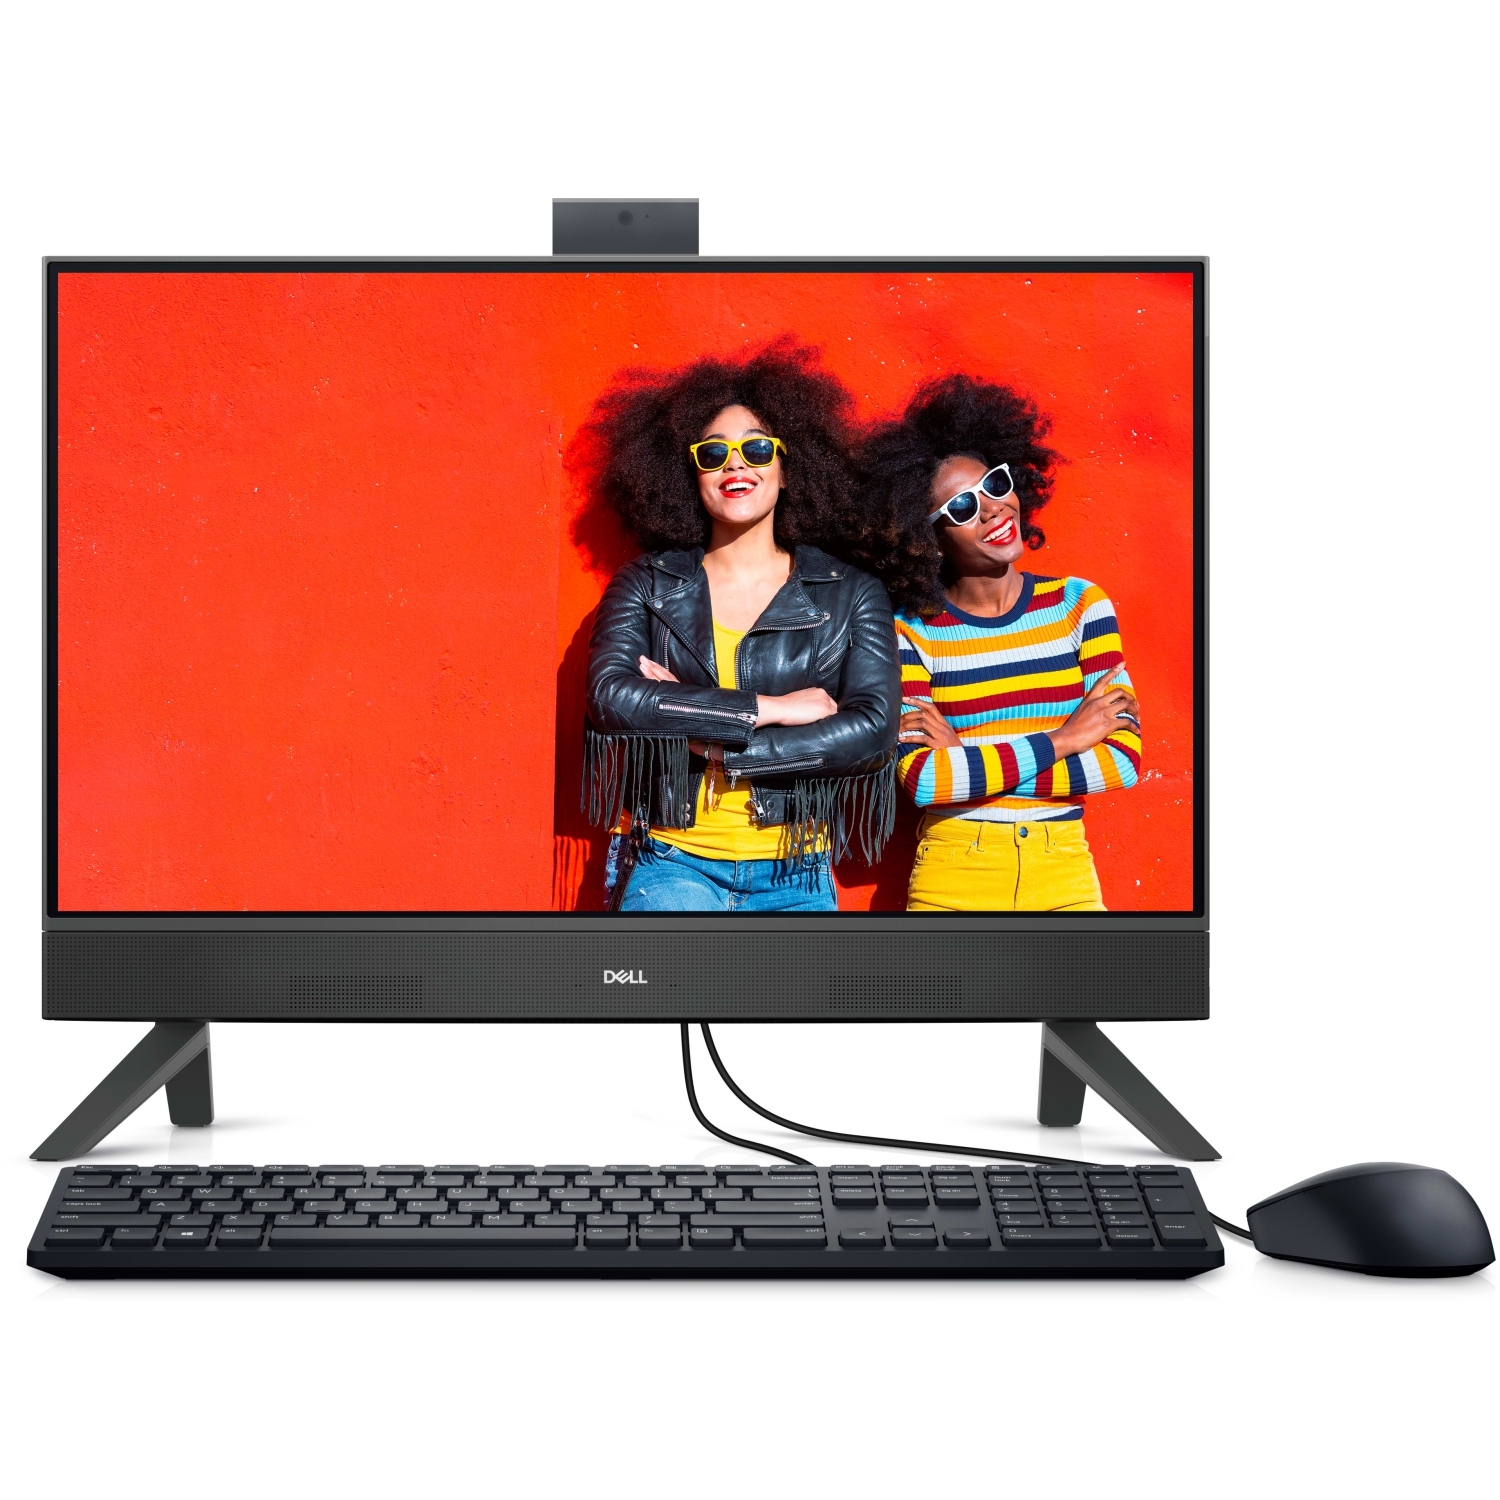 Dell Inspiron 23 5410 AIO (2022) | 23.8" FHD | Core i5 - 1TB HDD + 256GB SSD - 12GB RAM | 10 Cores @ 4.4 GHz - 12th Gen CPU Certified Refurbished